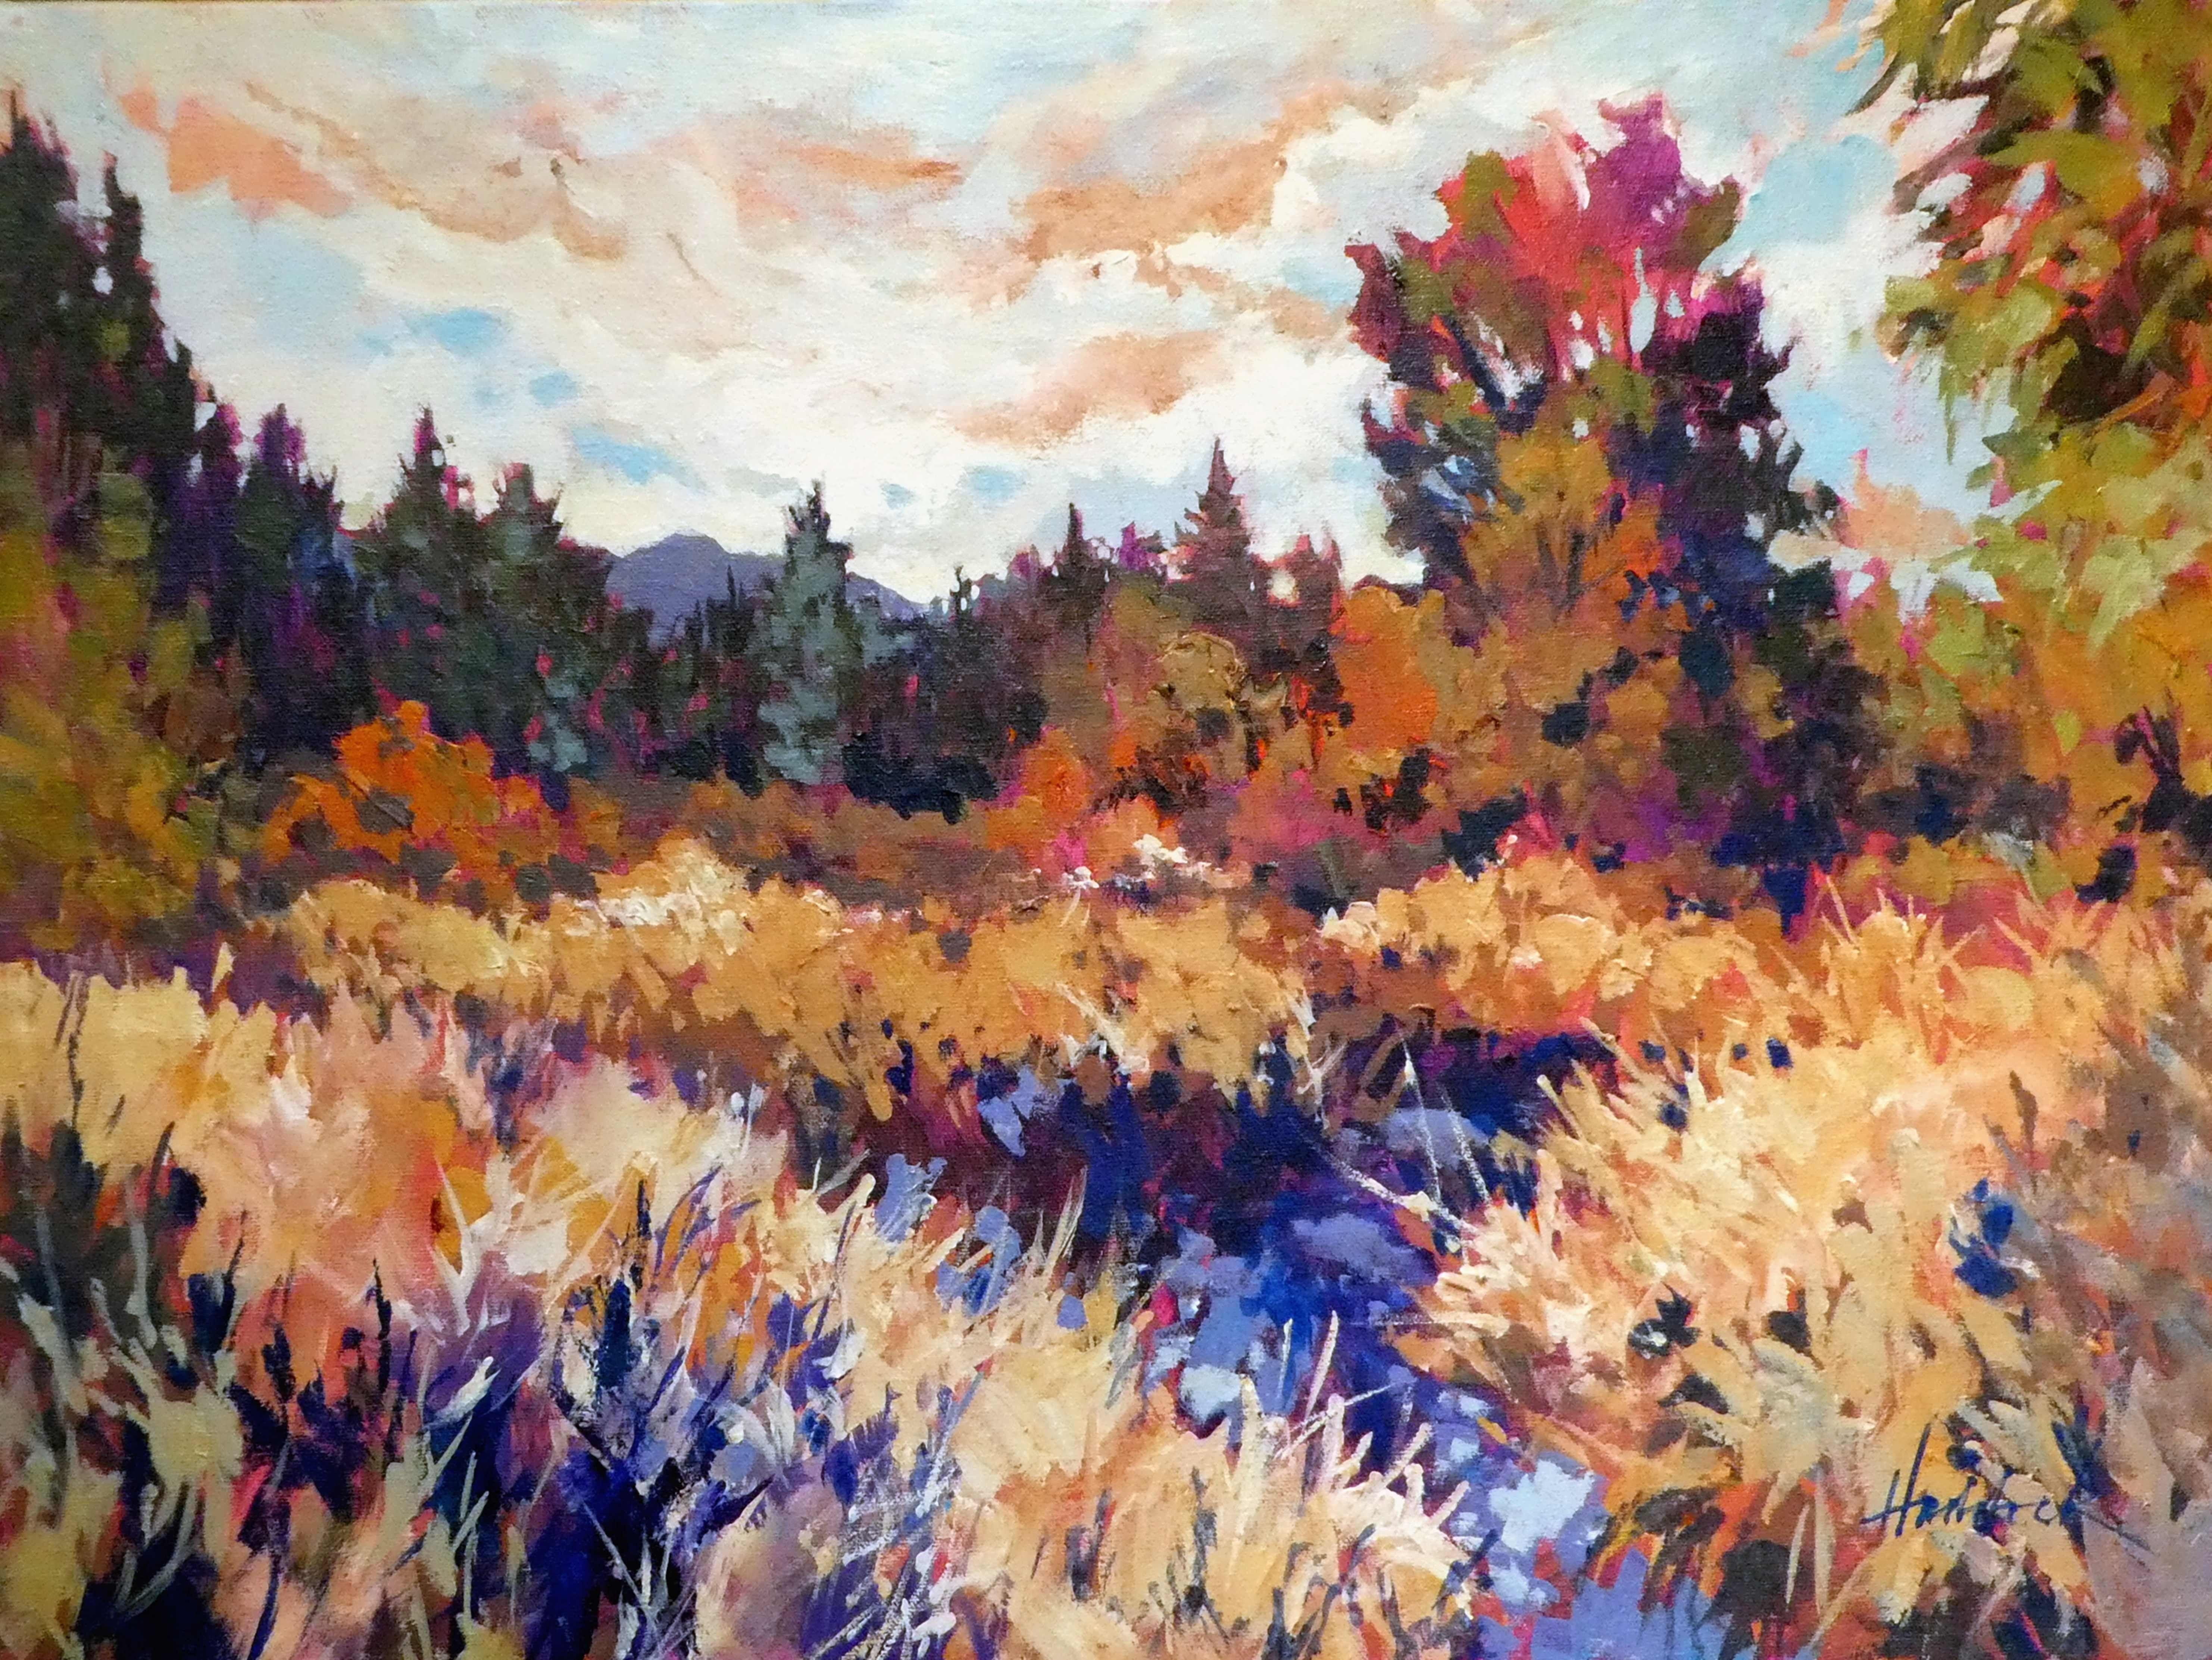 Fall grasses and trees line the banks of a creek which meanders through a floodplain. Painted on 3/4" deep stretched canvas, edges painted black, and wired ready to hang with or without a frame.  Protected from dust and UV light by a high quality